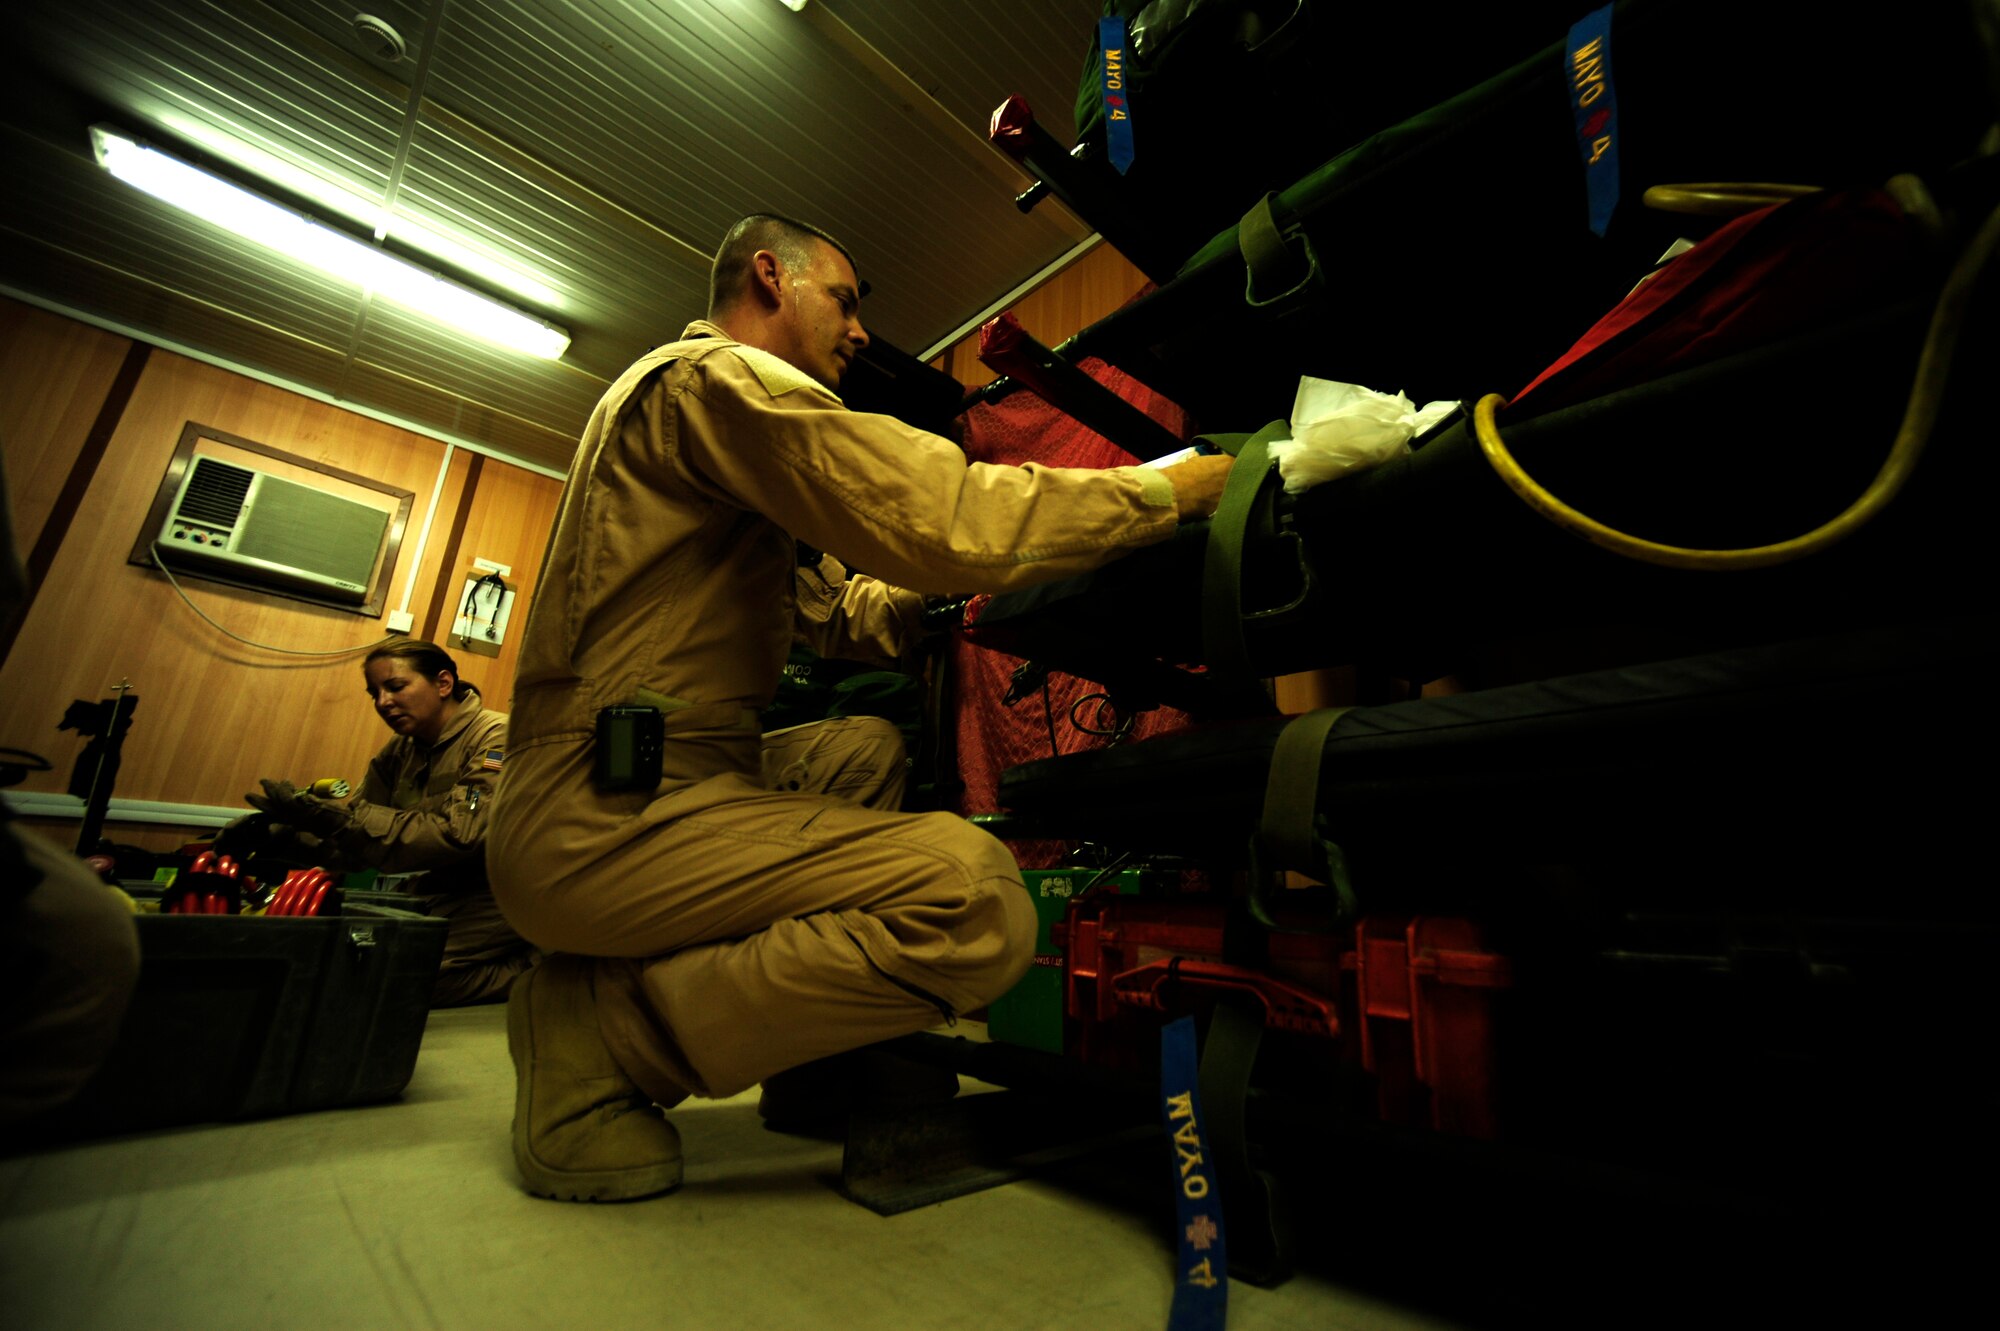 U.S. Air Force reservists Senior Master Sgt. Tony Stuat and Tech Sgt. Margerite Hellwich, aeromedical evacuation technicians assigned to the 362nd Expeditionary Aeromedical Evacuation Flight, prep medical gear prior to mission brief at Joint Base Balad, Iraq on July 17, 2010. 
(U.S. Air Force photo by Staff Sgt. Andy M. Kin / Released)